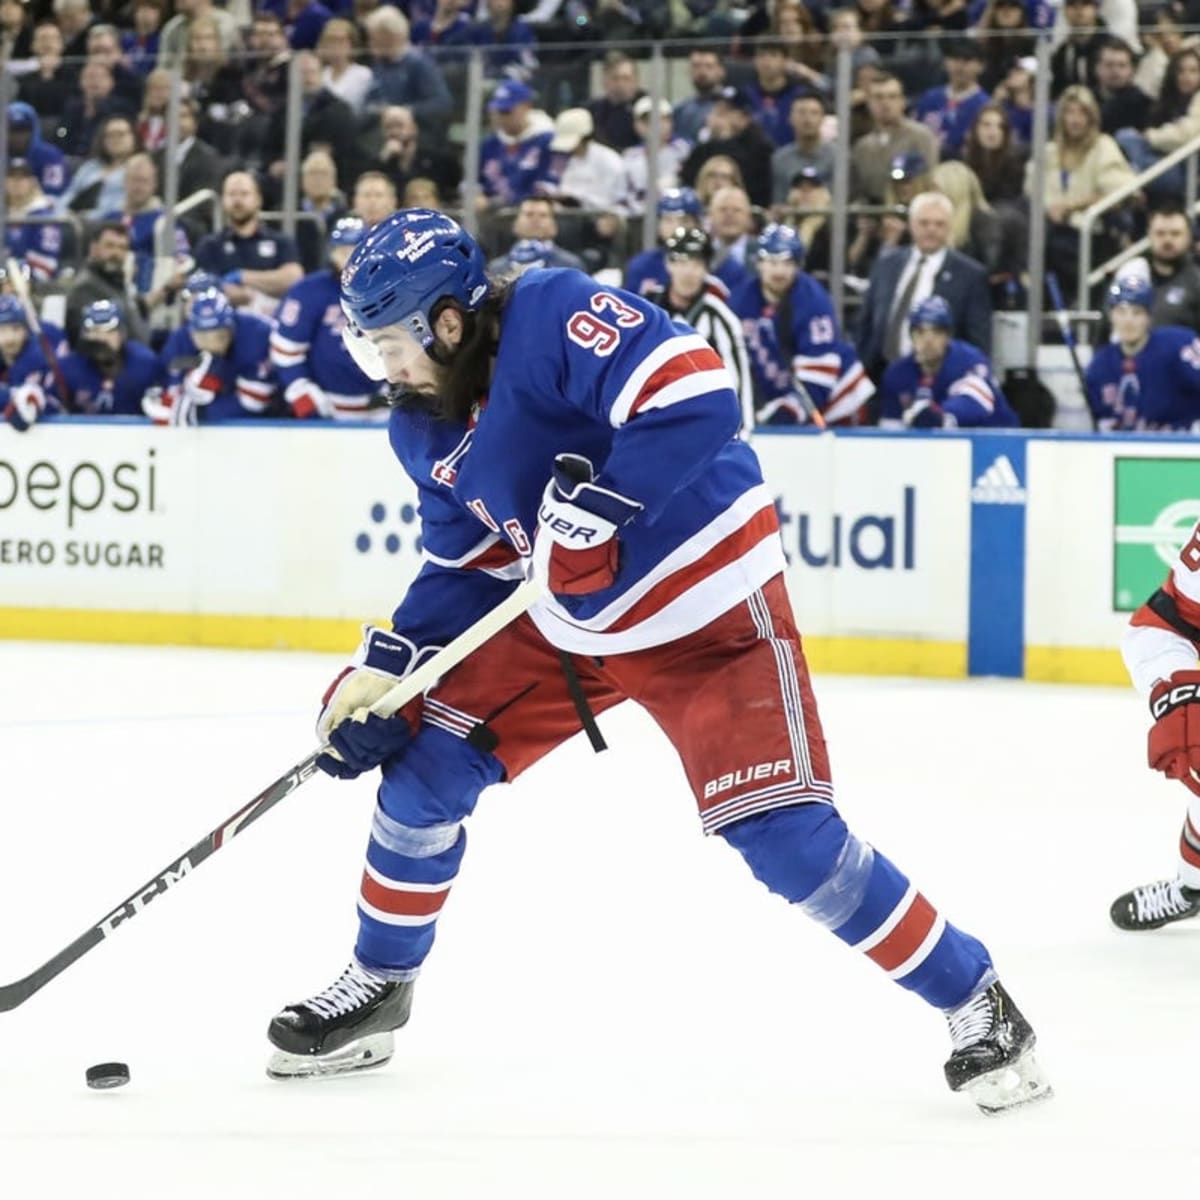 How to watch New York Rangers vs. New Jersey Devils (1/19/2021